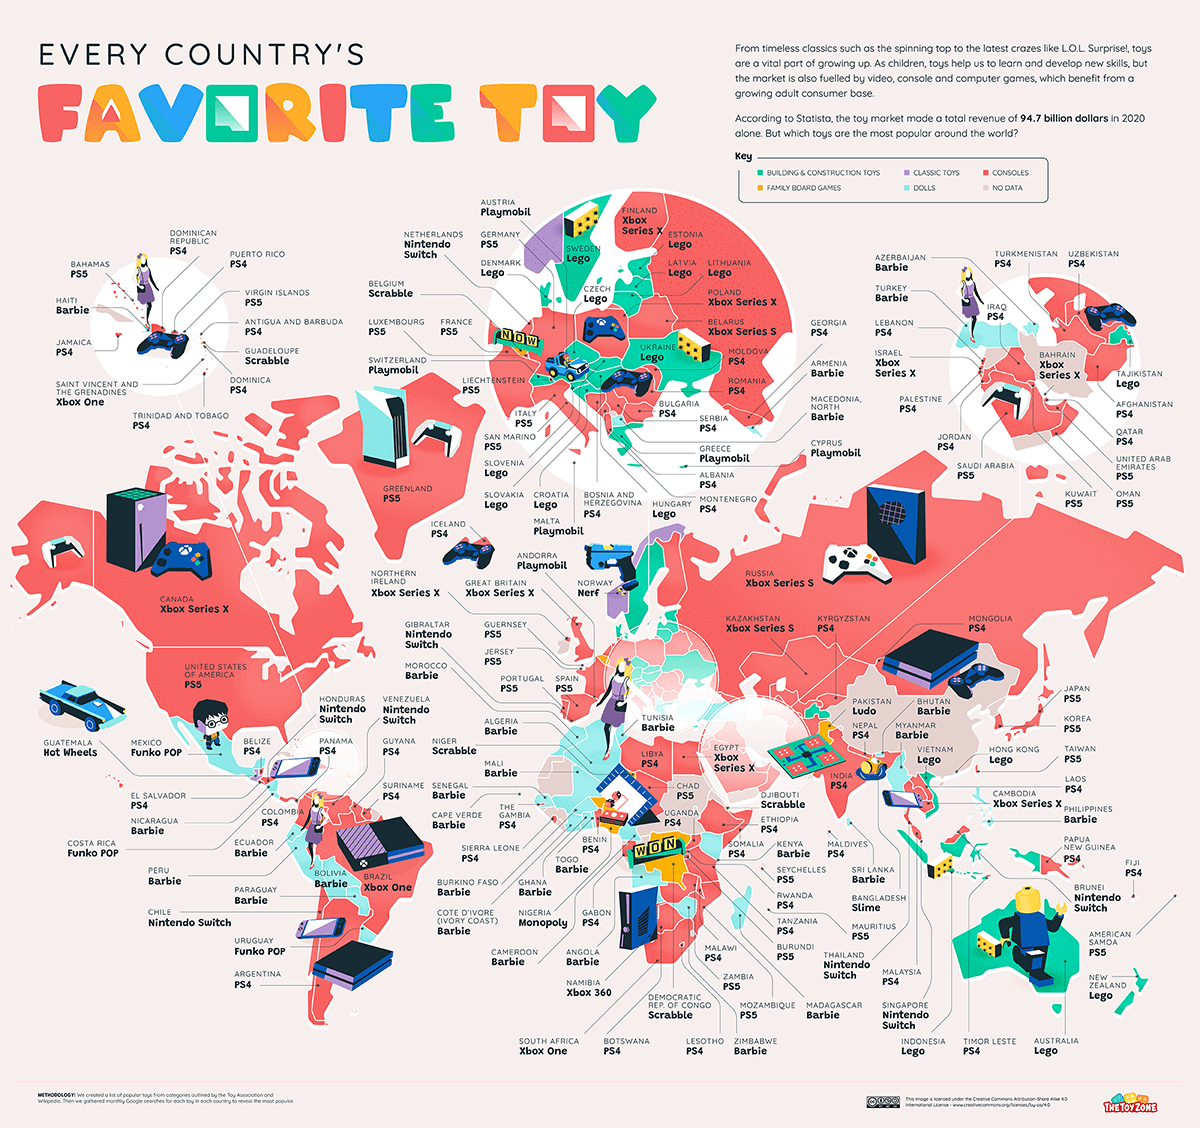 01_Every-Country-Favorite-Toys_World-Map_Overall